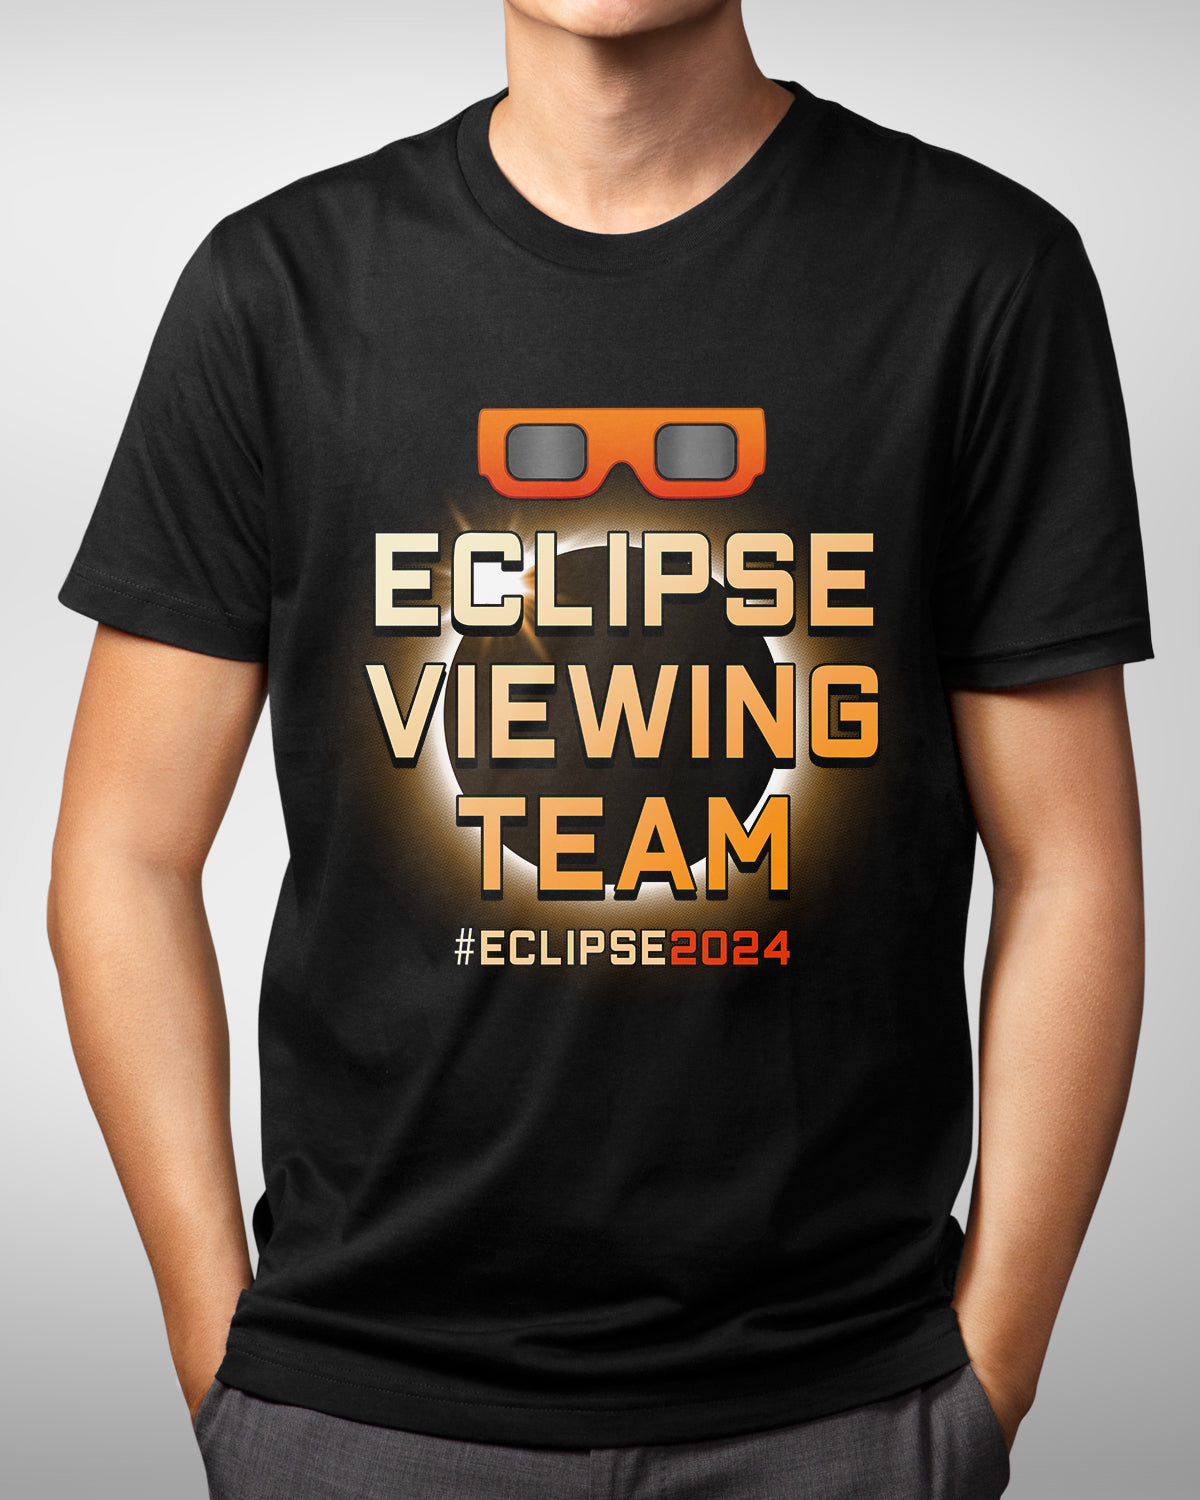 2024 Total Eclipse Team #Eclipse2024 Shirt, April 8 Path of Totality Tee, Matching Astronomy Eclipse Souvenir, Spring Event Group Gift